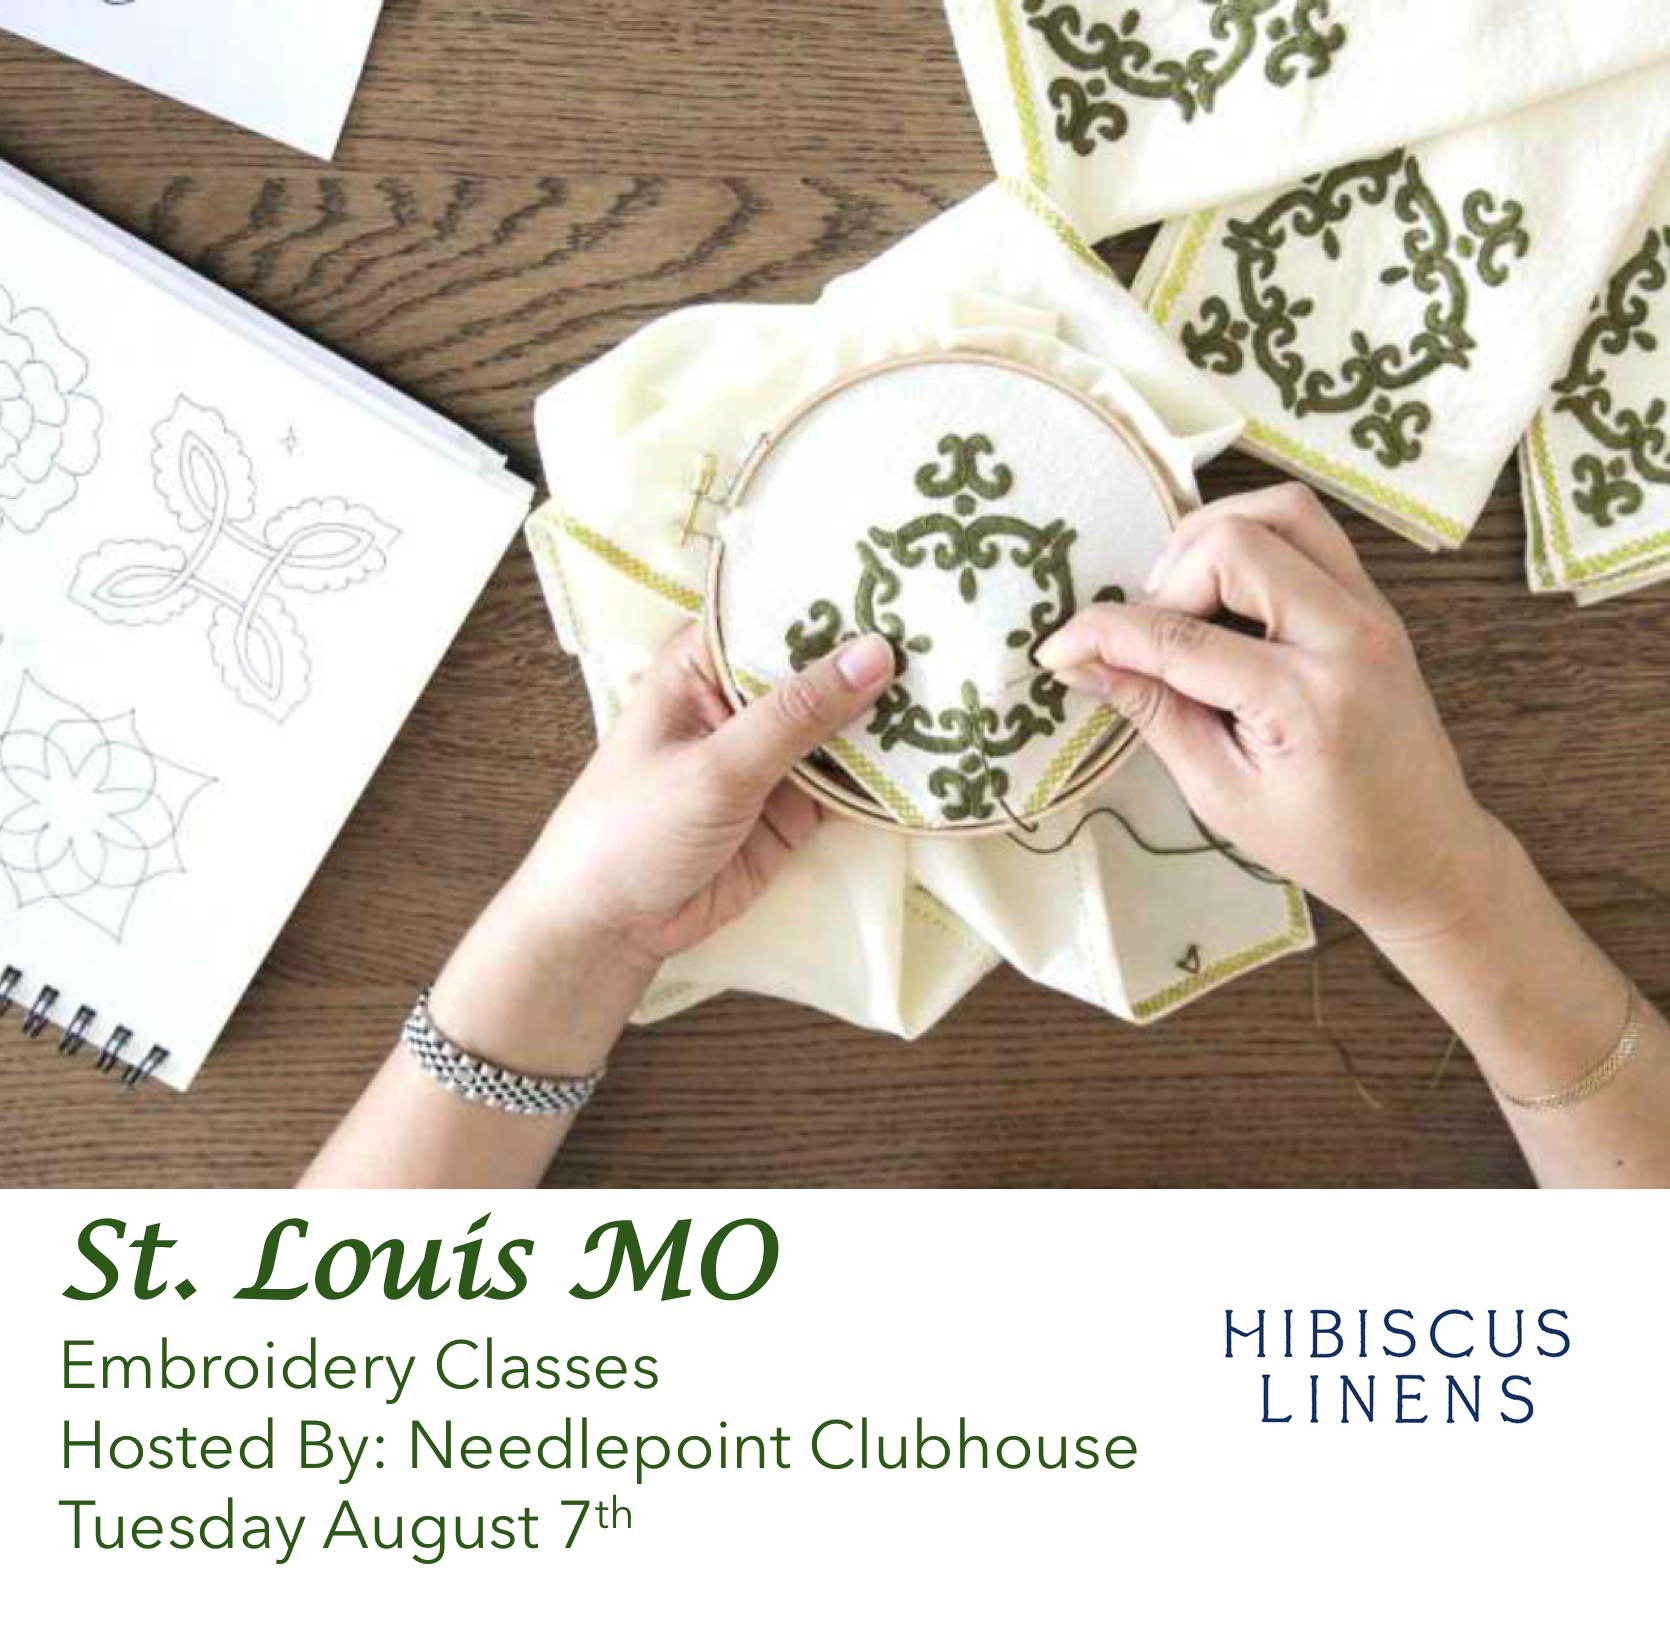 Join me for embroidery classes in St. Louis MO